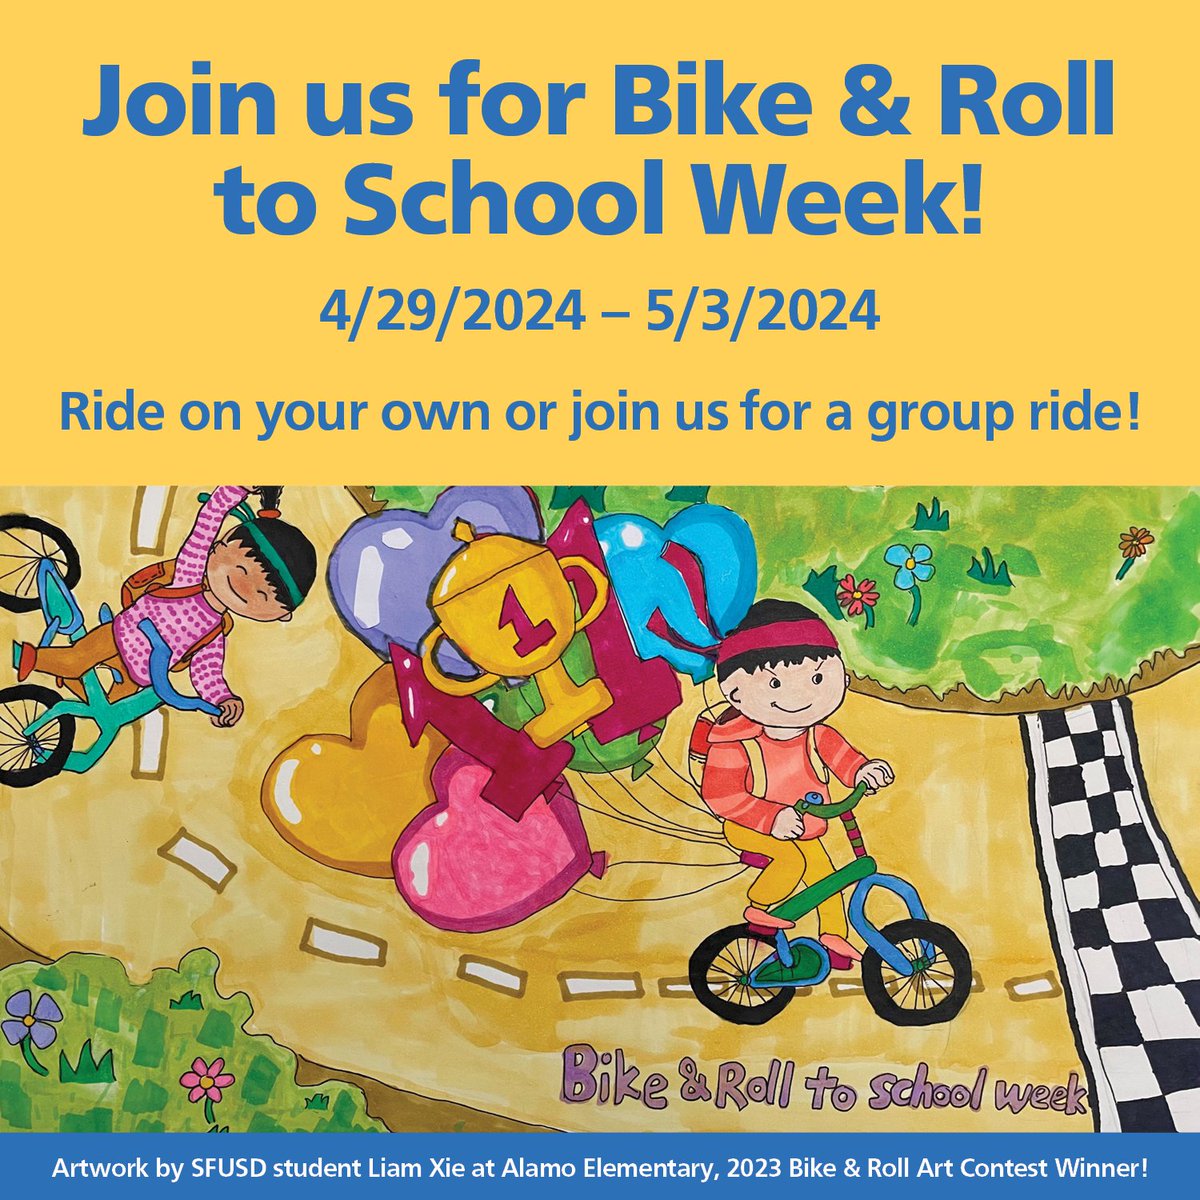 Thousands of students across San Francisco will bike, roll & scoot to school during Bike & Roll to School Week this April 29 - May 3. Join the fun! sfsaferoutes.org/bike @sfsaferoutes #SFSafeRoutes, #IBikeSF